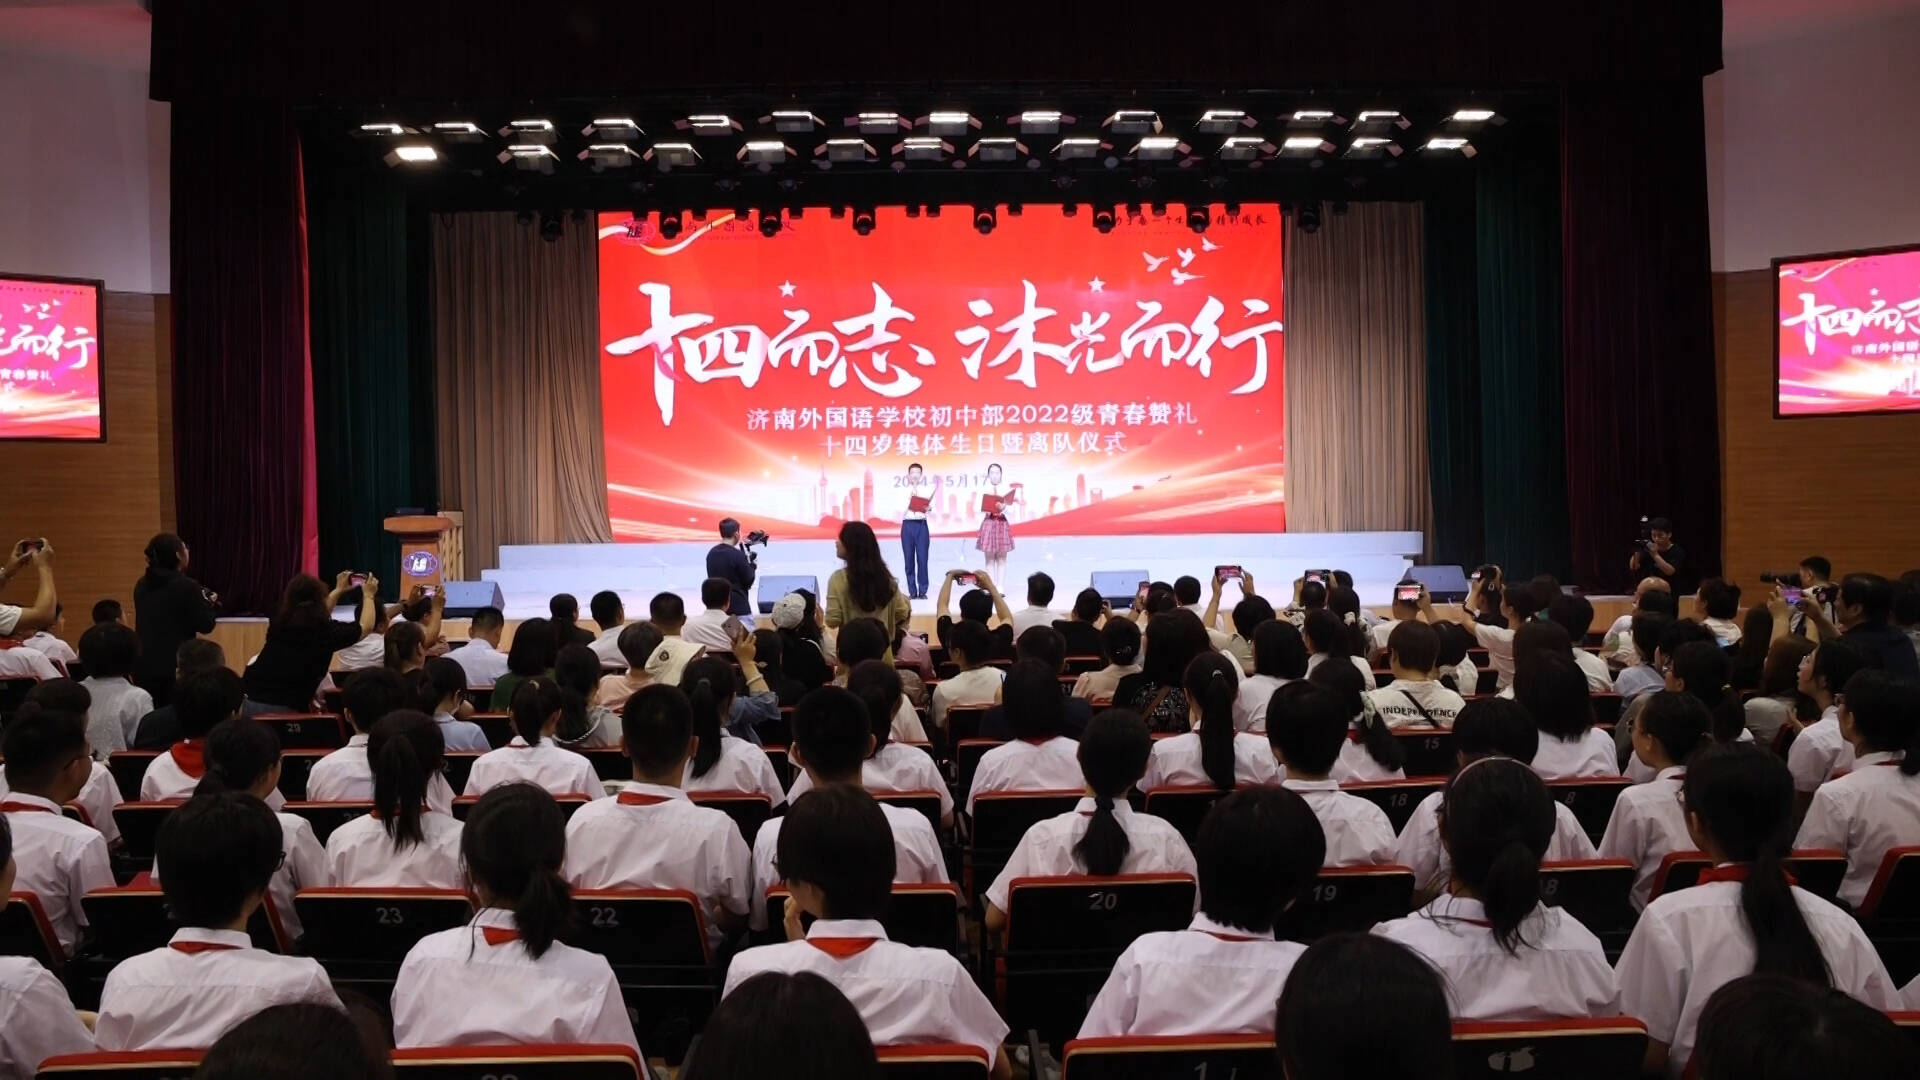  Praise the youth to grow up in the sunshine Jinan Foreign Language School This youth ceremony is full of emotion